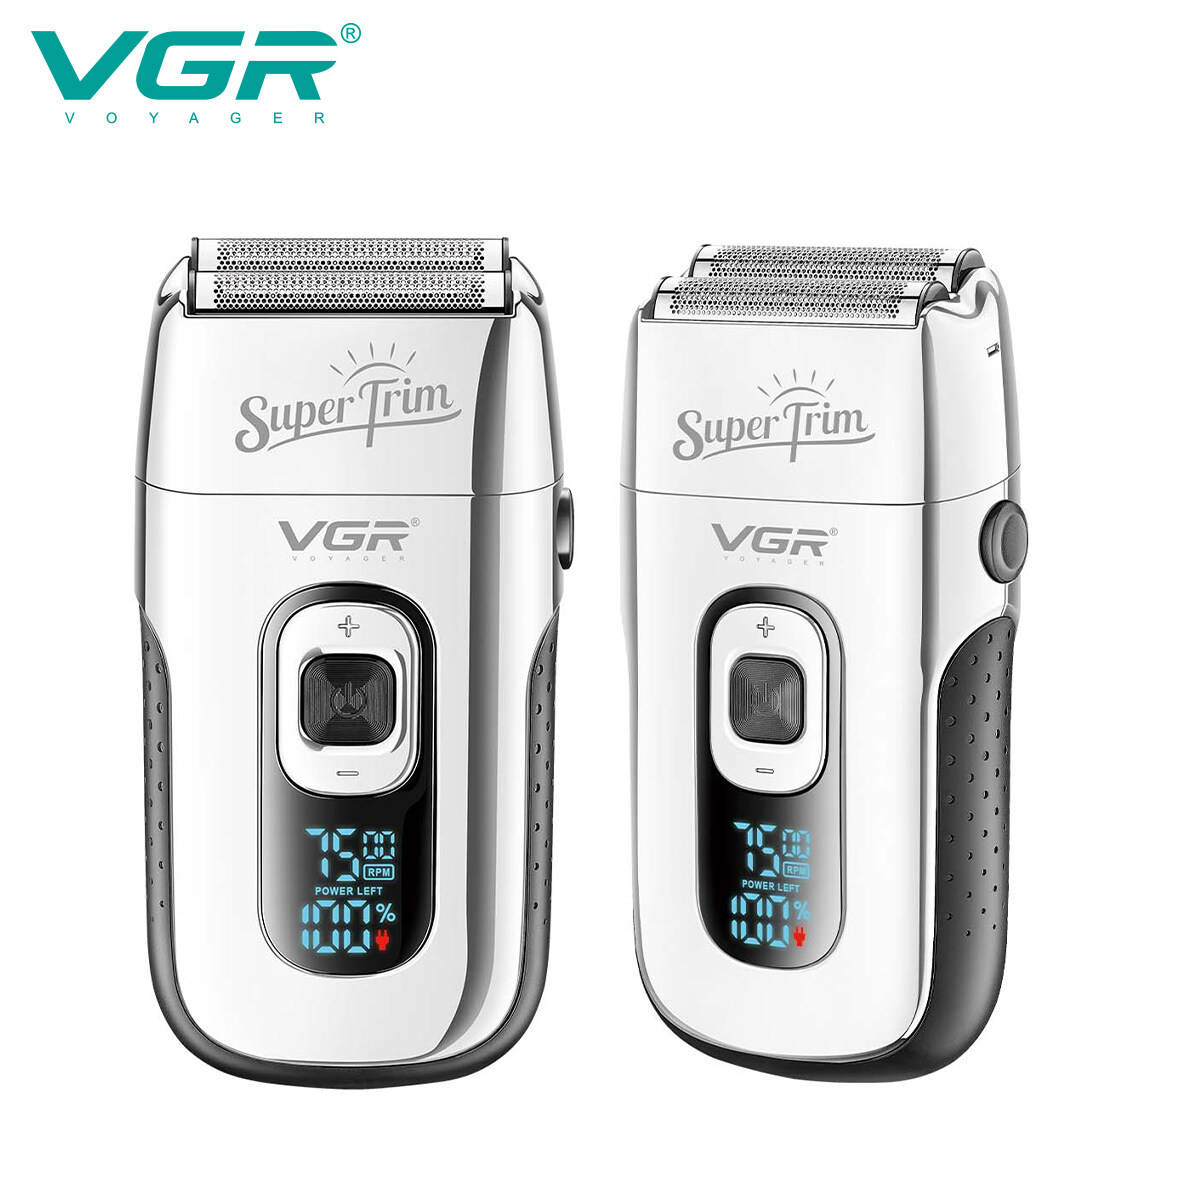 electric shaver twin blade factories, electric shaver twin blade factory, electric shaver twin blade manufacturer, top electric shaver manufacturers, electric shaver twin blade manufacturers